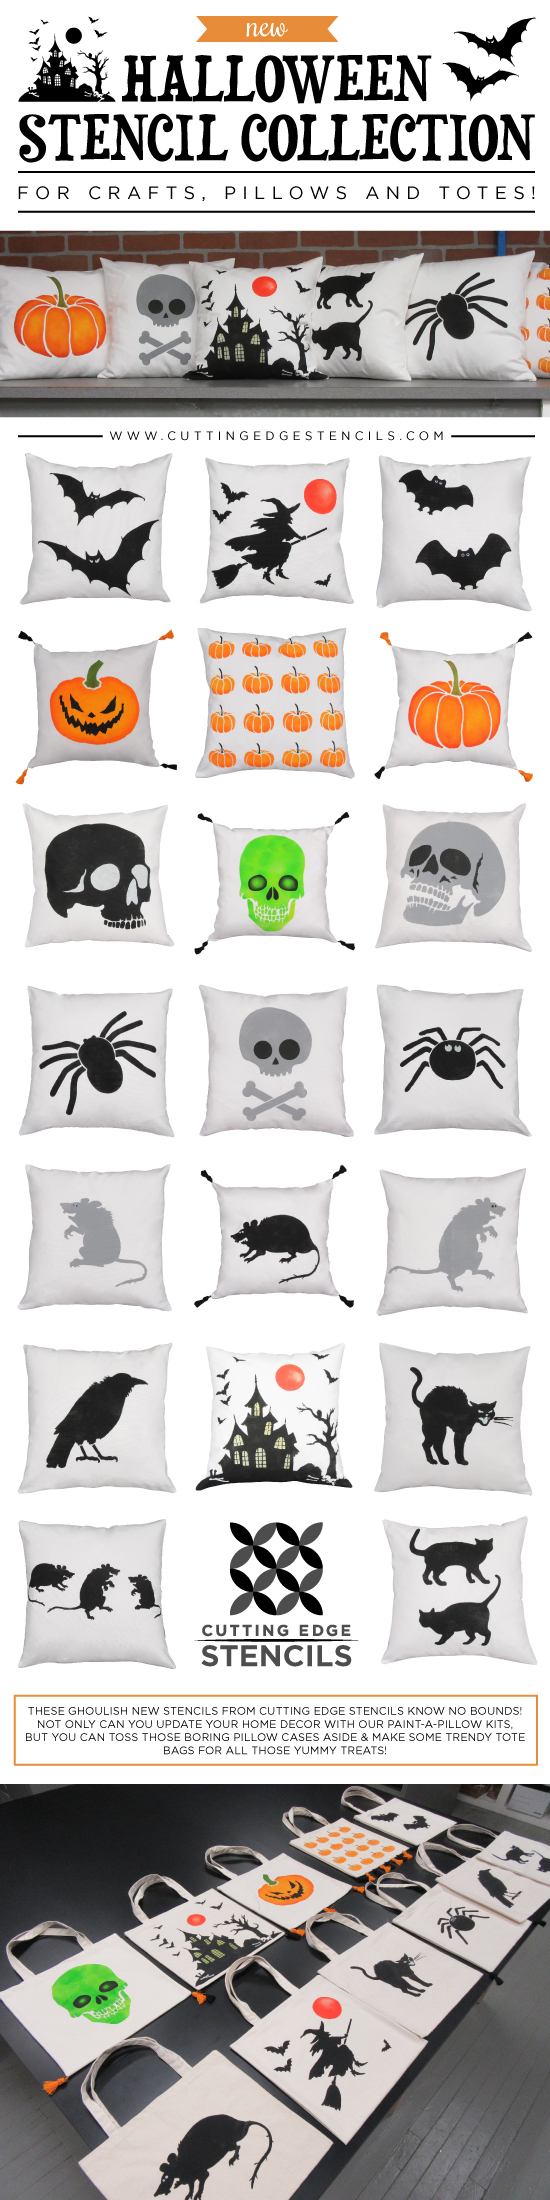 The Halloween Stencil Collection from Cutting Edge Stencils comes in craft and pillow/tote bag sizes. http://www.cuttingedgestencils.com/christmas-stencils-valentine-halloween.html